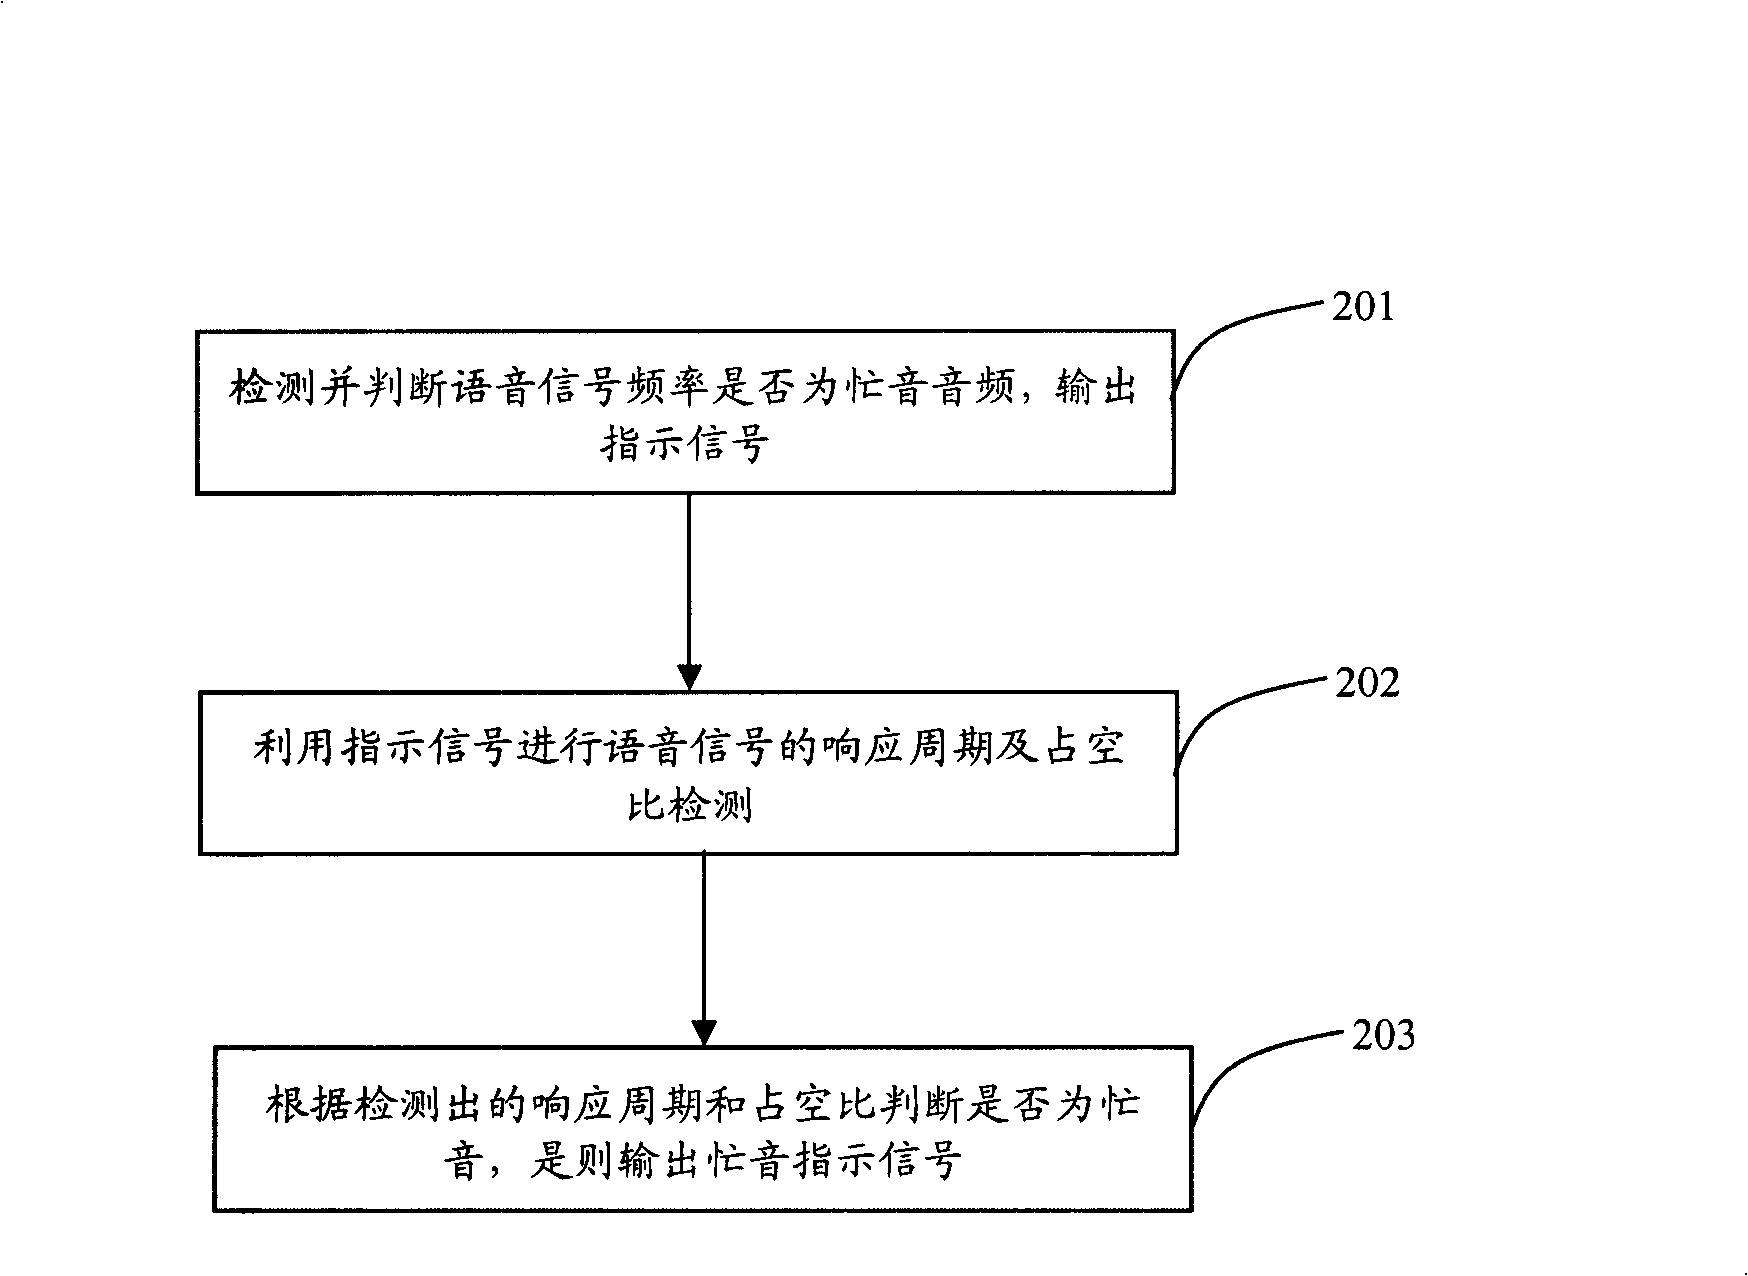 Busy tone detecting method and apparatus